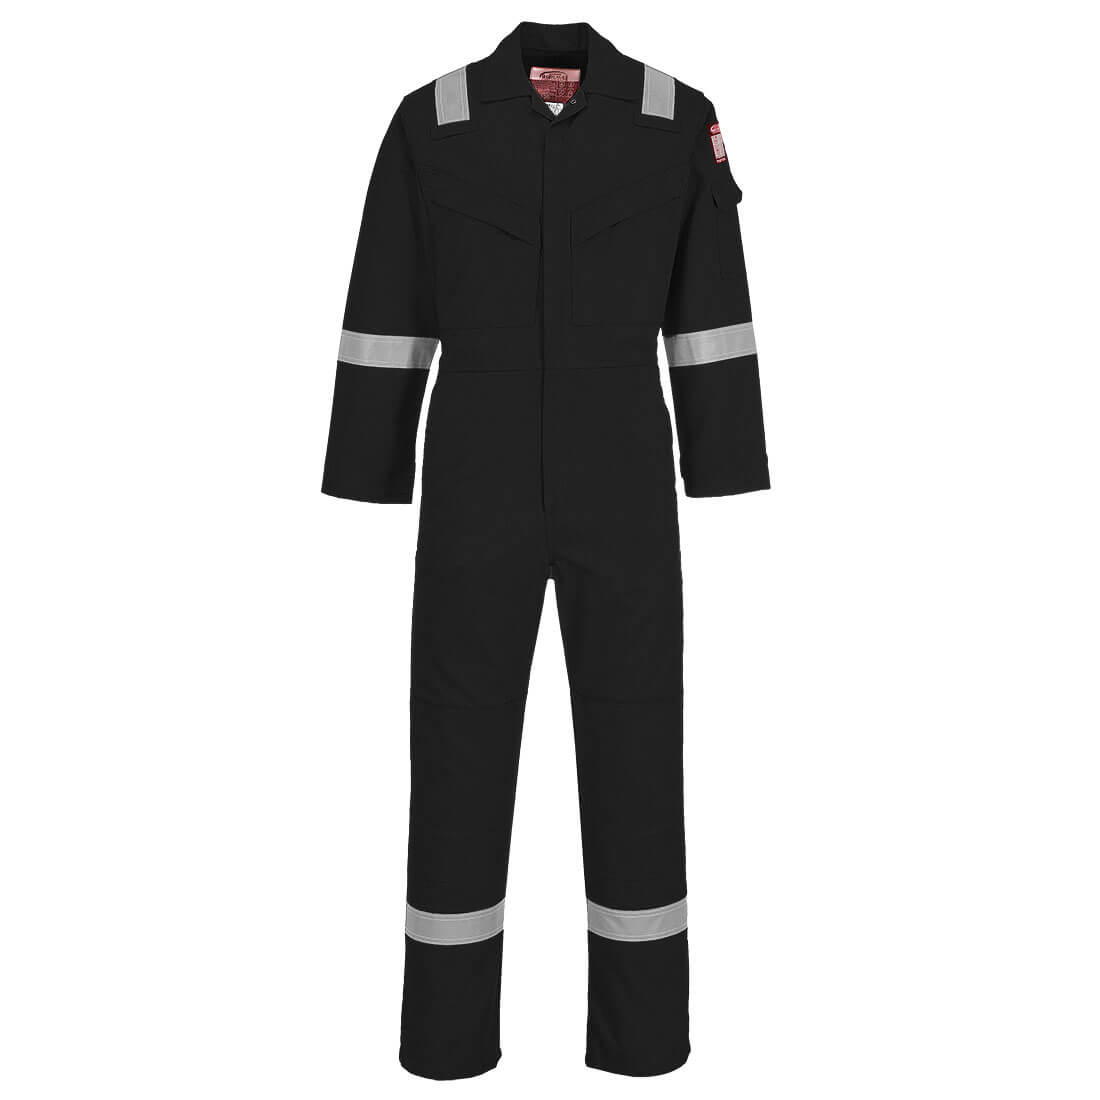 Image of Biz Flame Mens Flame Resistant Super Lightweight Antistatic Coverall Black 2XL 32"